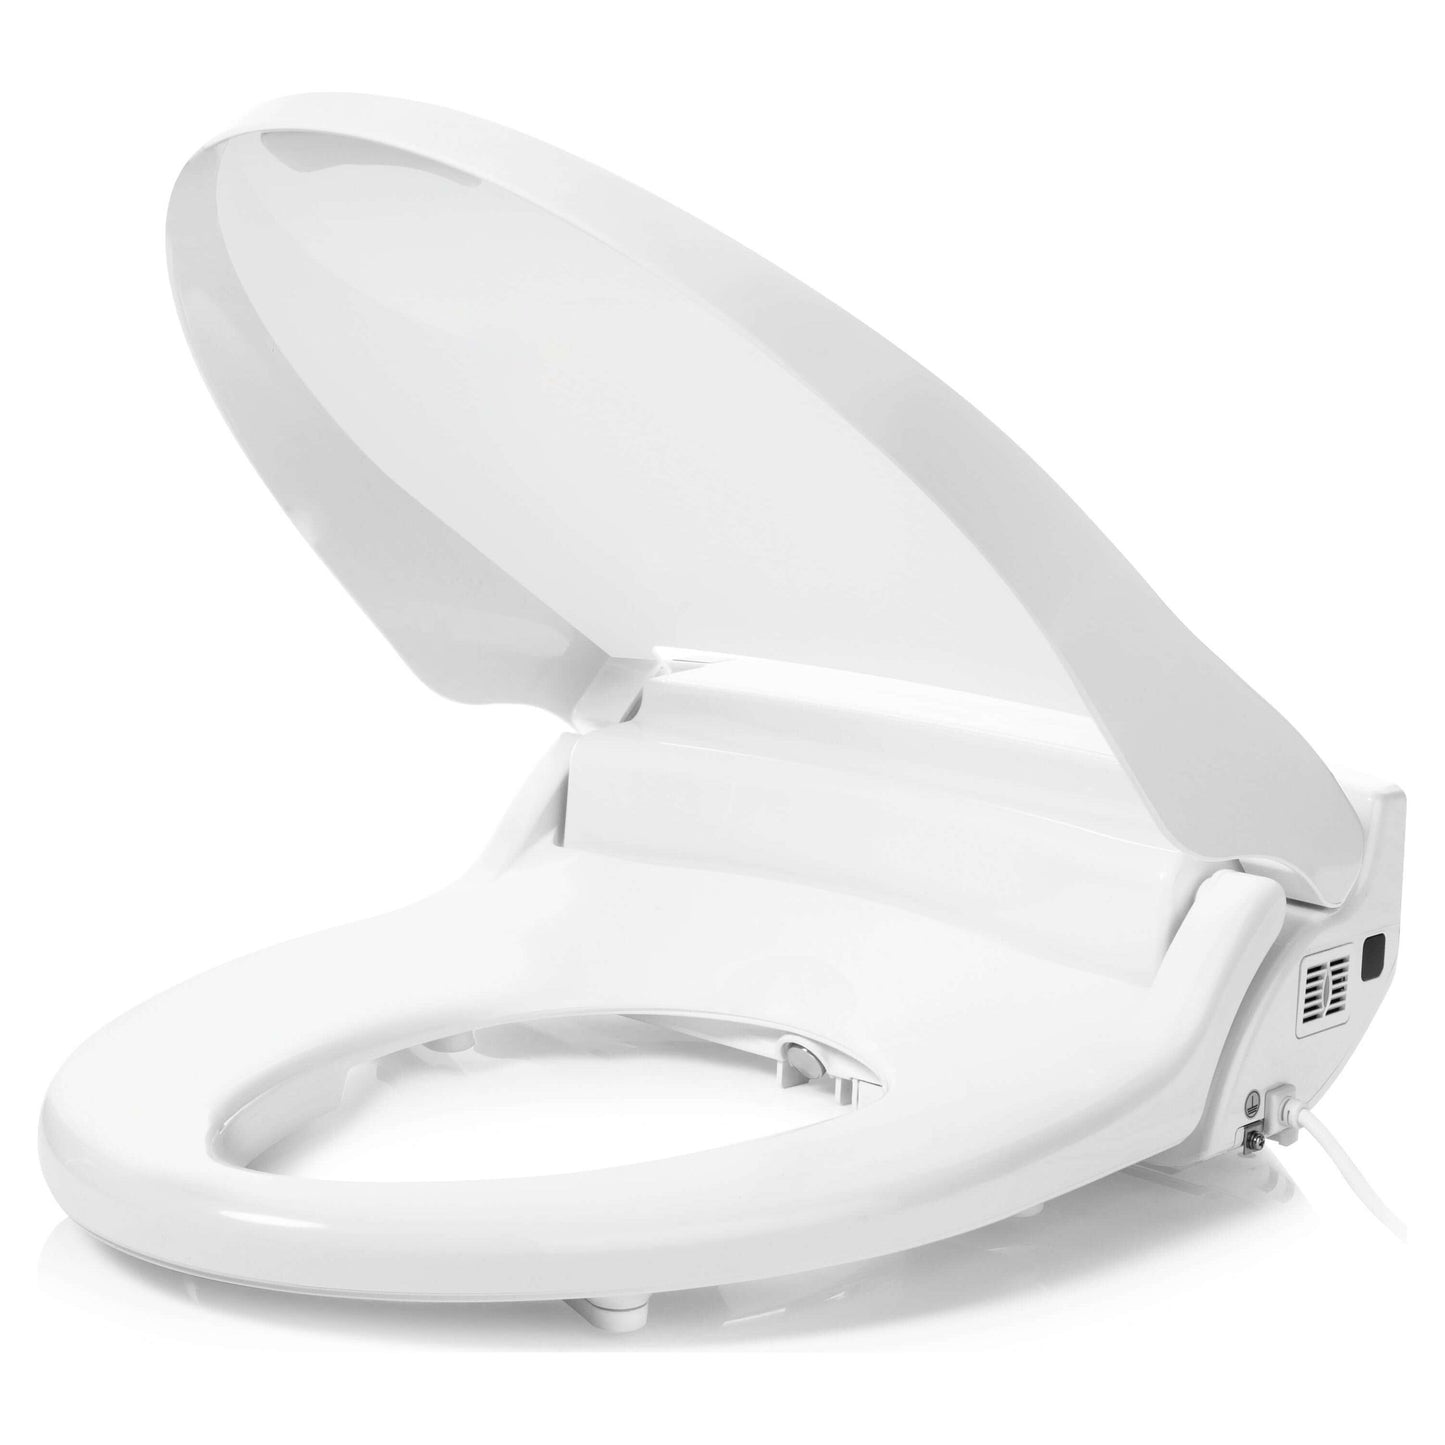 Swash Select DR802 Bidet Seat - side angled view with lid ajar